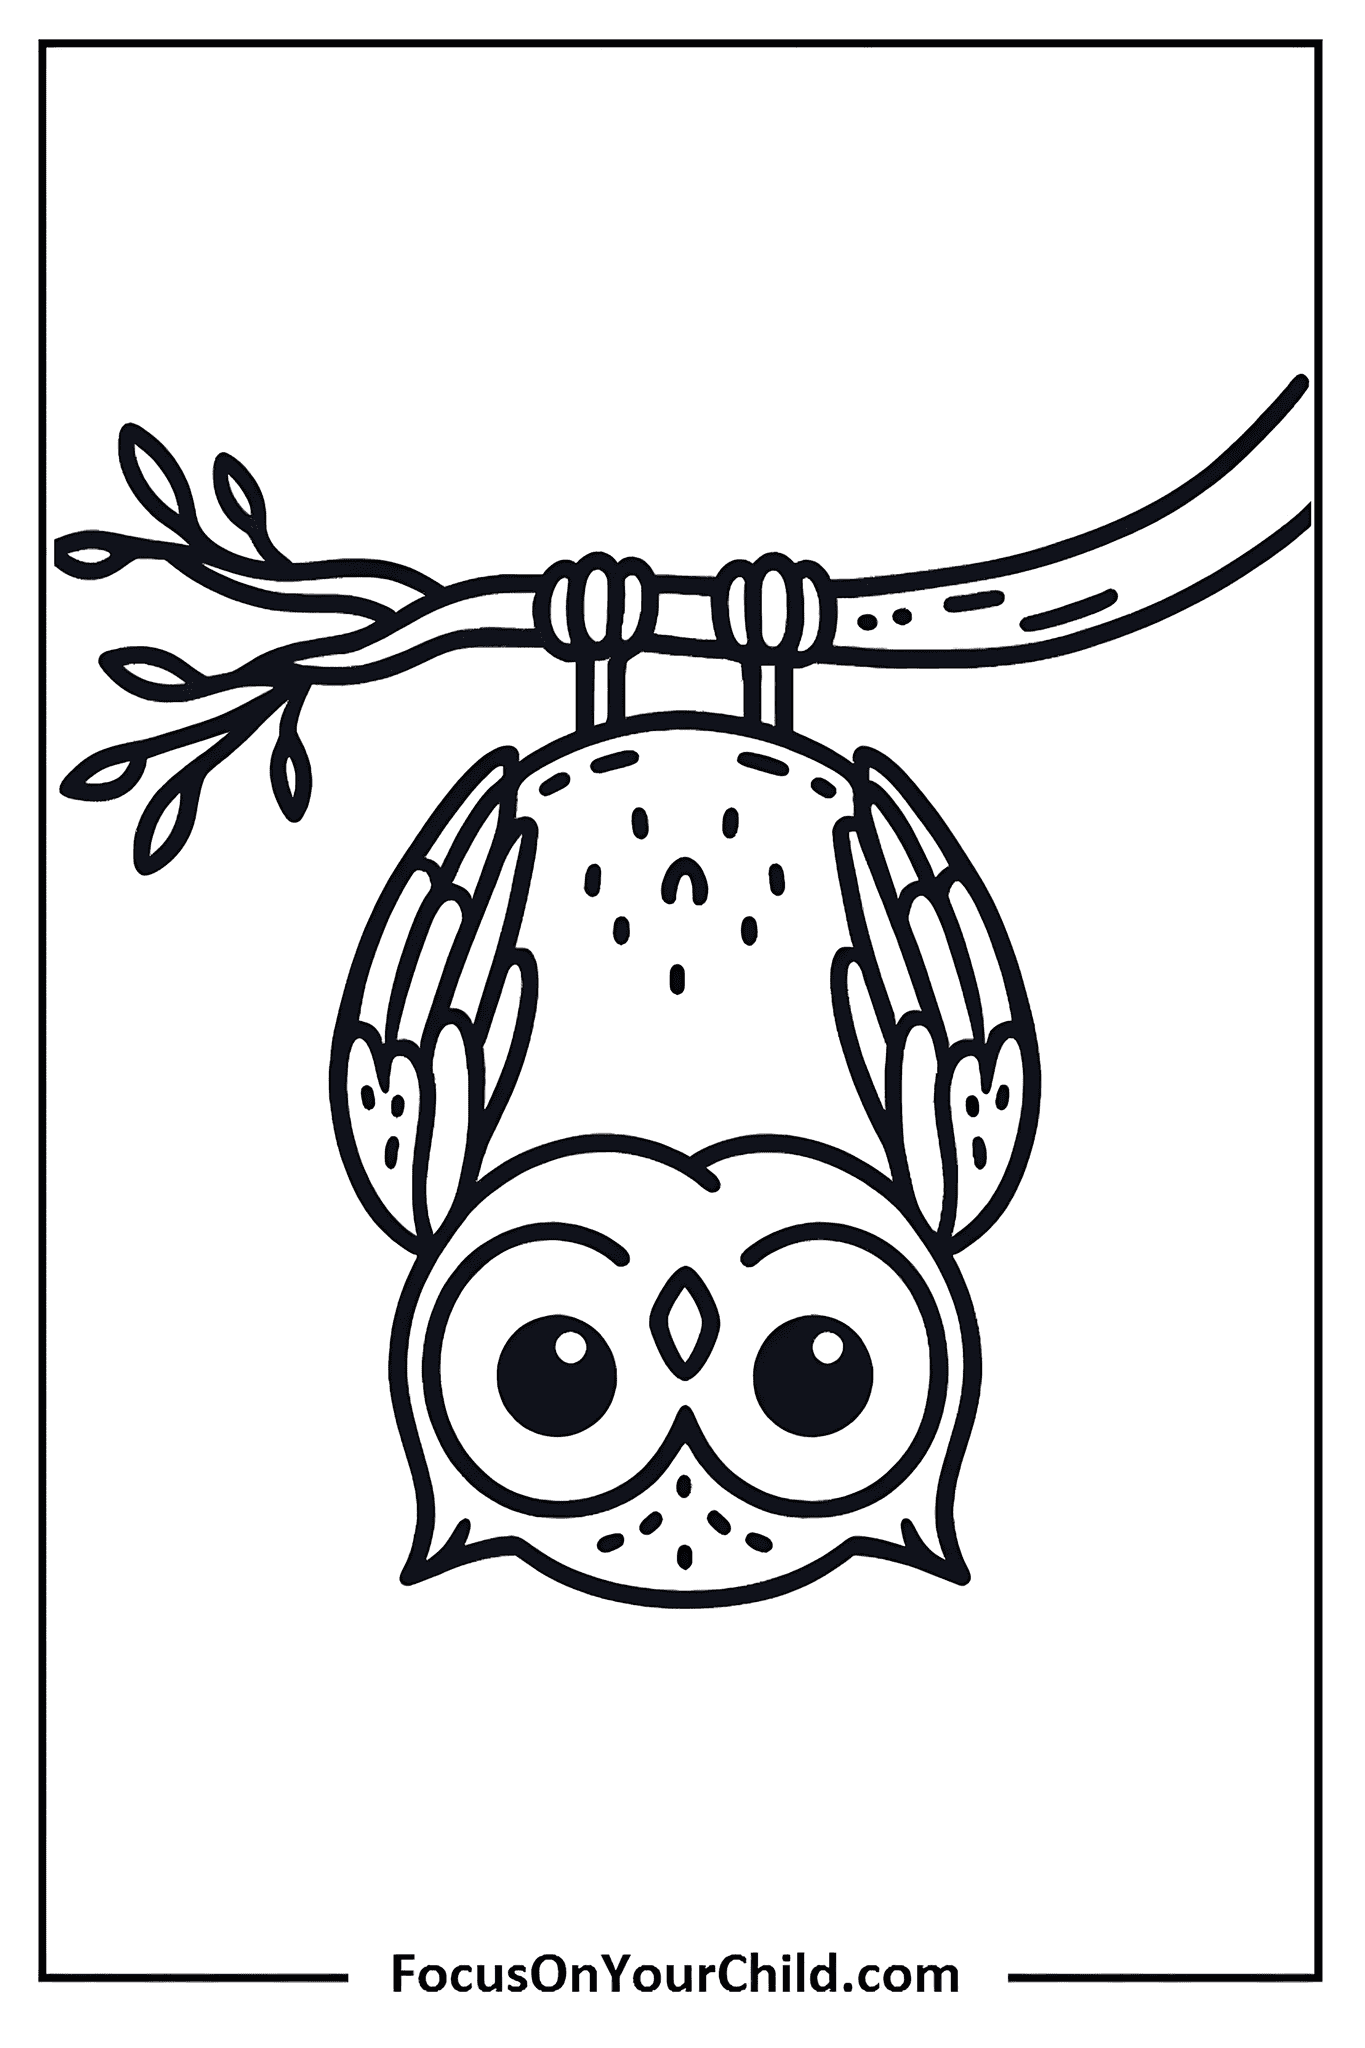 Owl hanging upside down from branch line drawing.